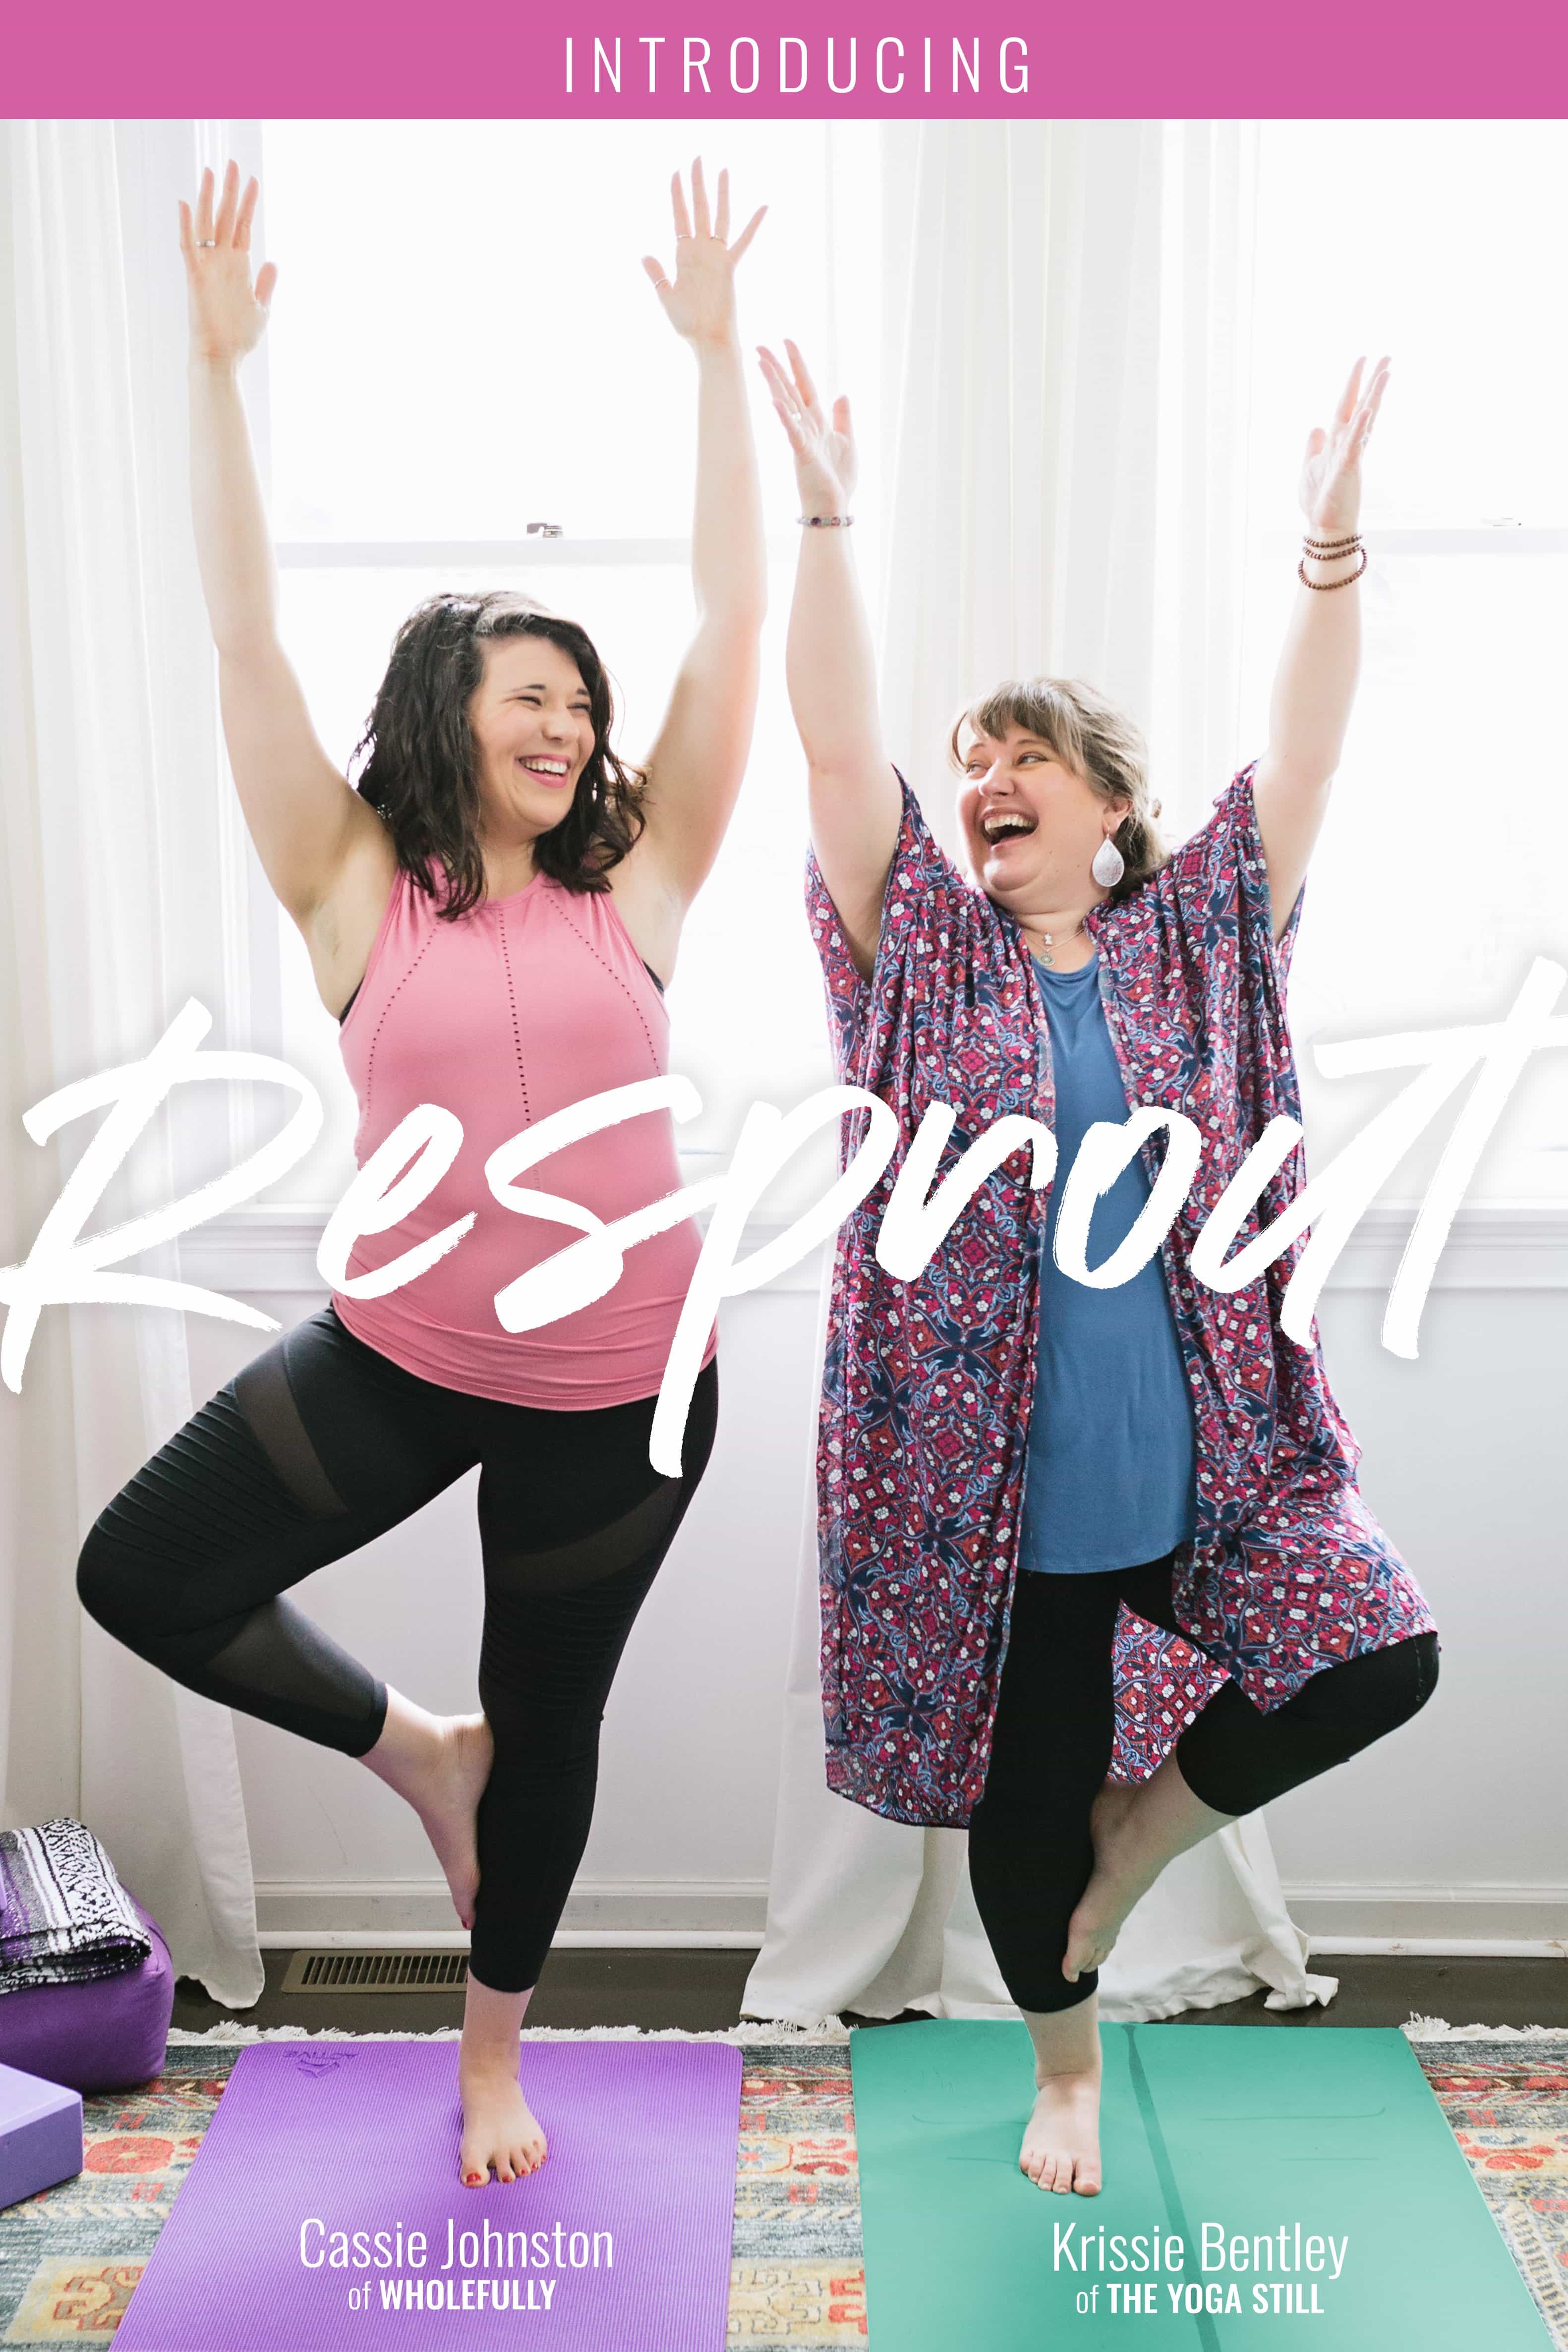 Two woman stand in tree pose on yoga mats and smile at each other. A text overlay reads "Resprout. Cassie Johnston of Wholefully. Krissie Bentley of The Yoga Still."